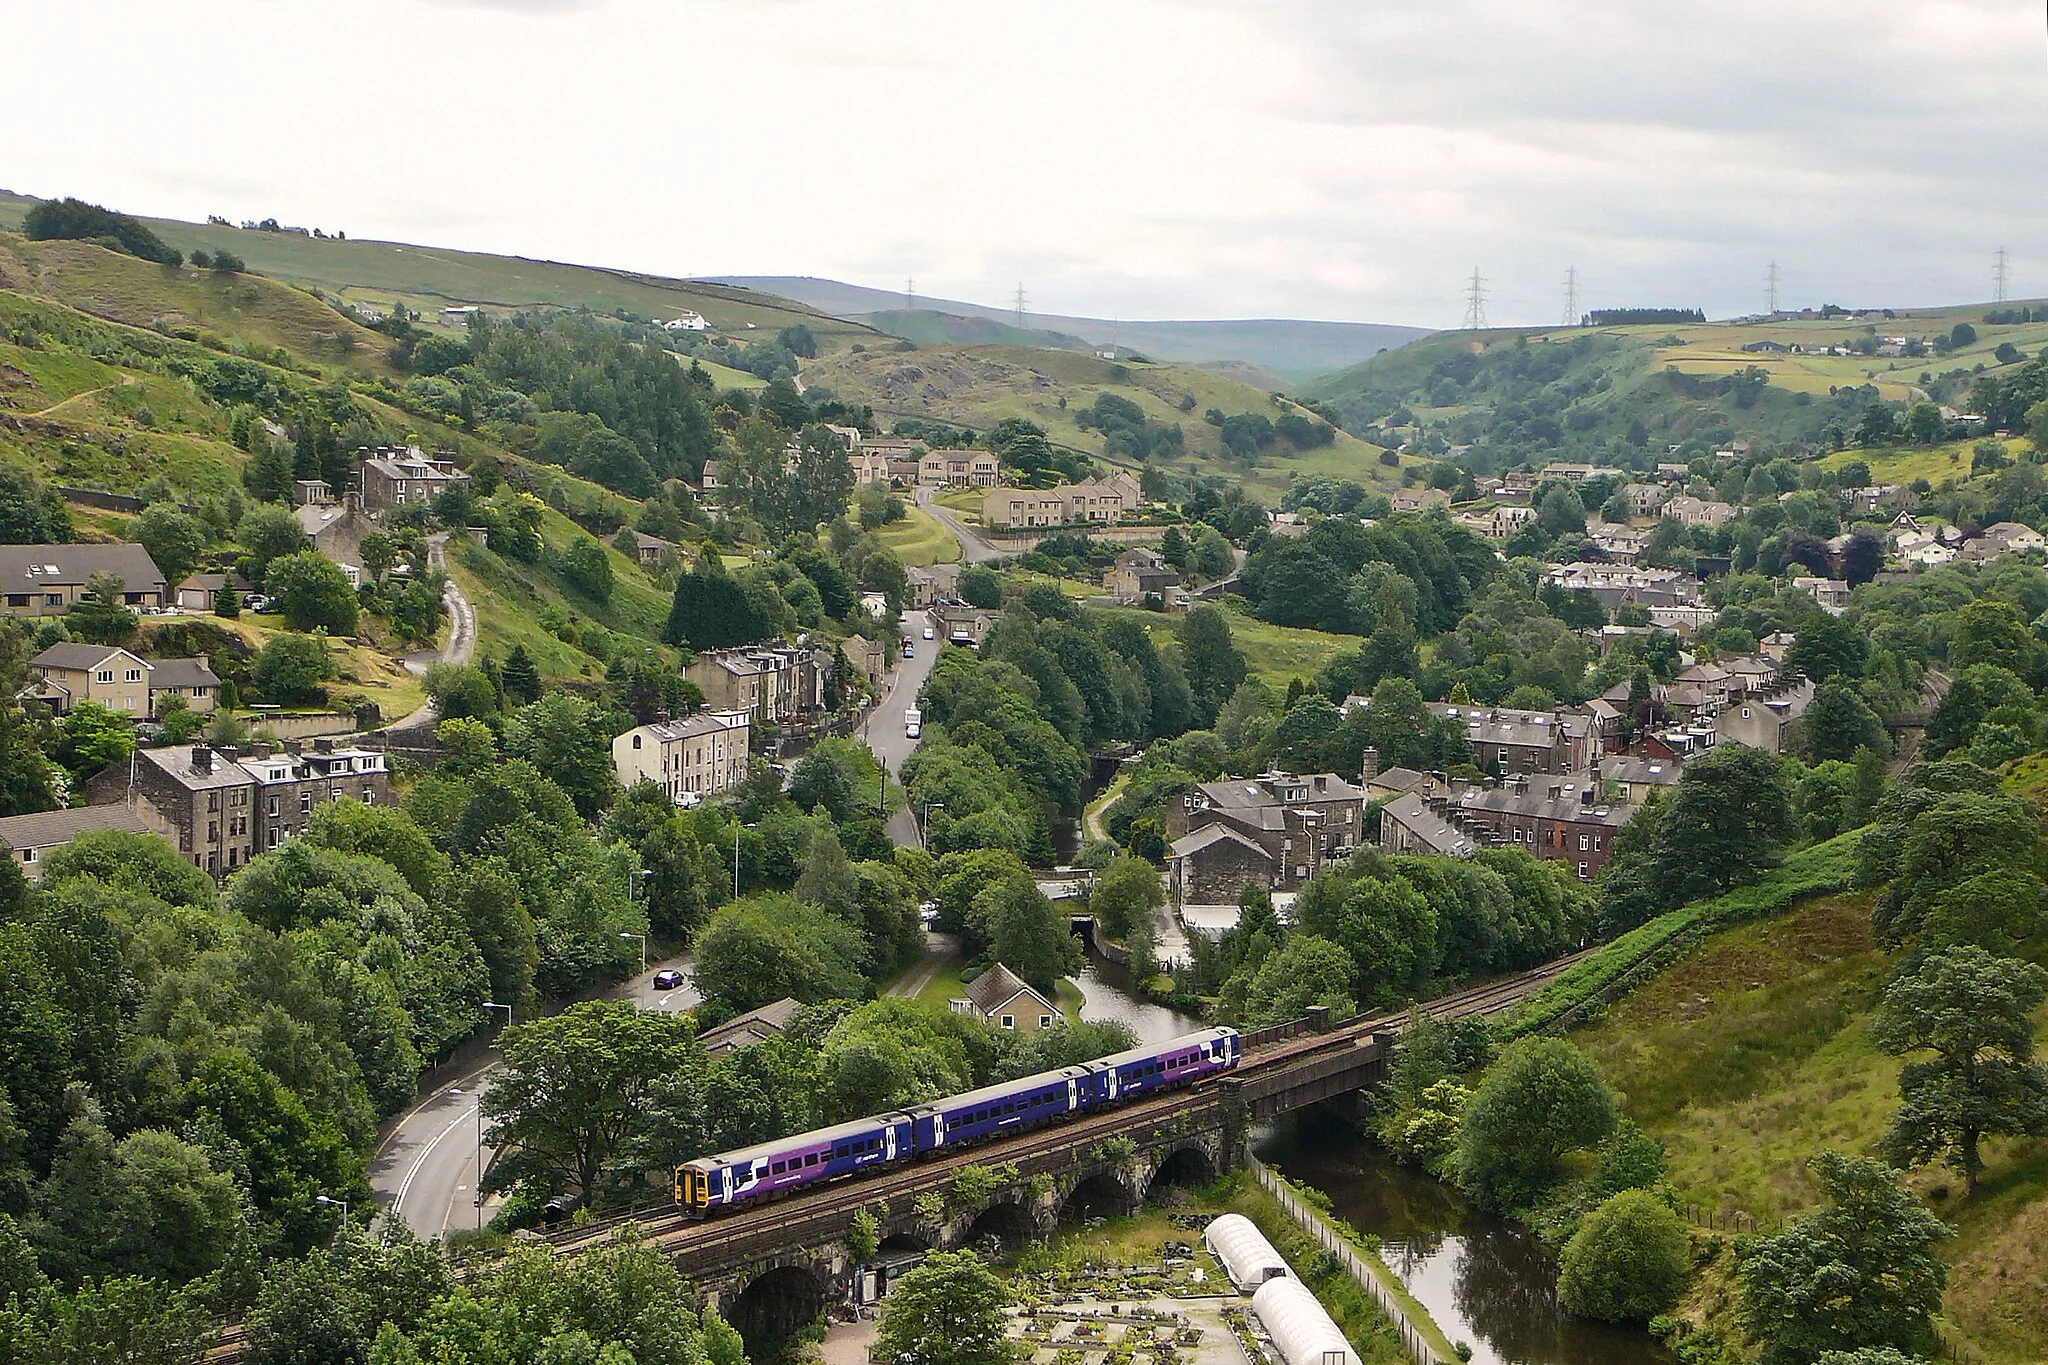 Image of Todmorden